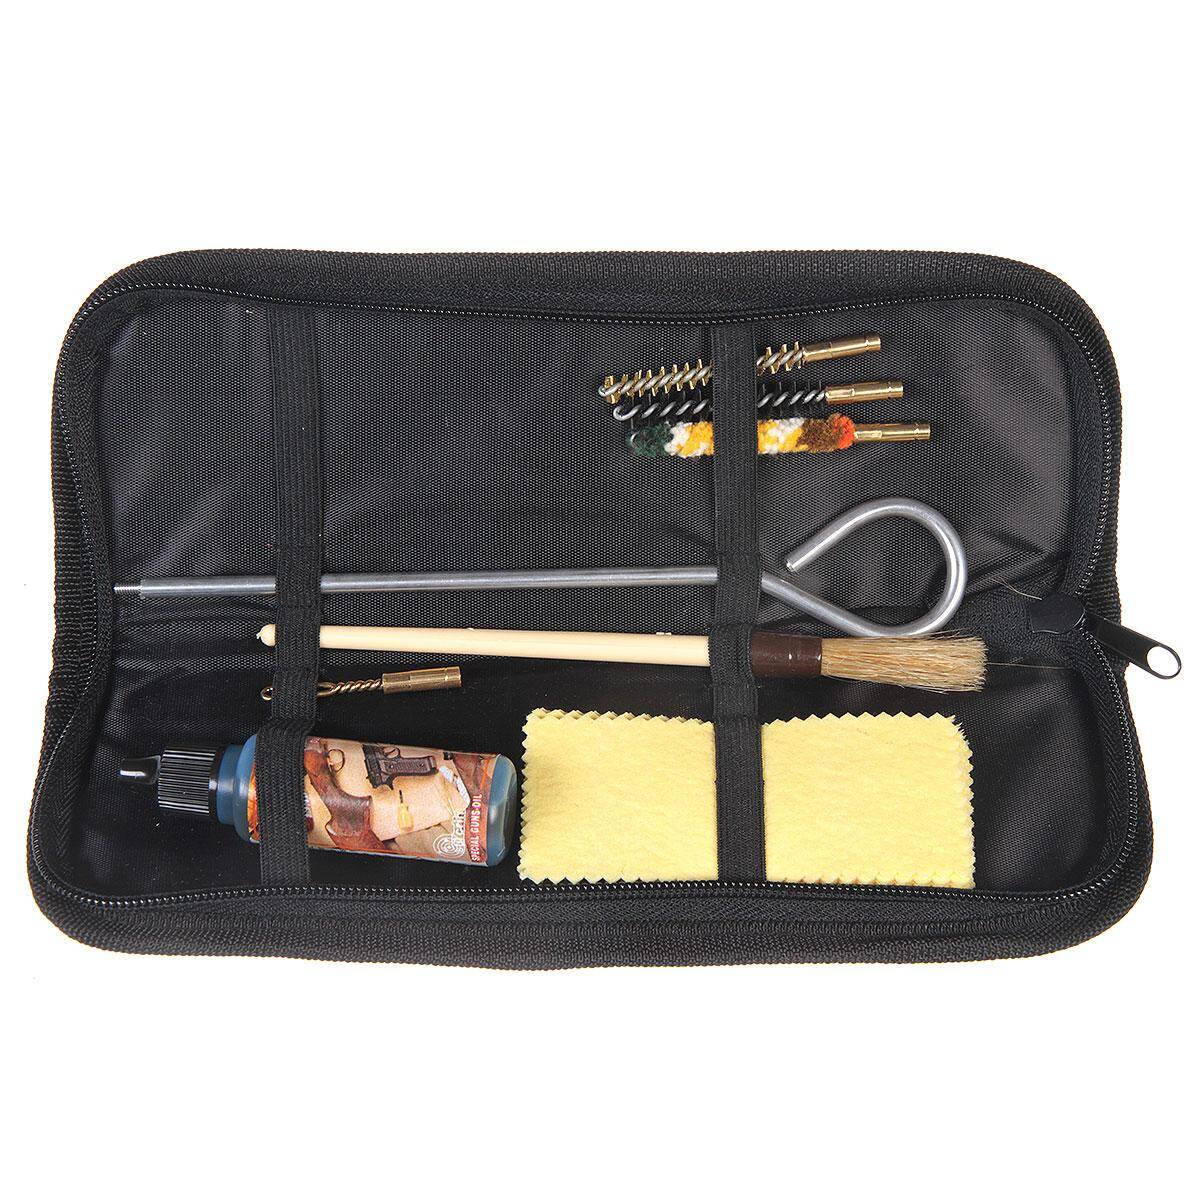 Modular Cleaning Rod Pistol Kit in a Bag